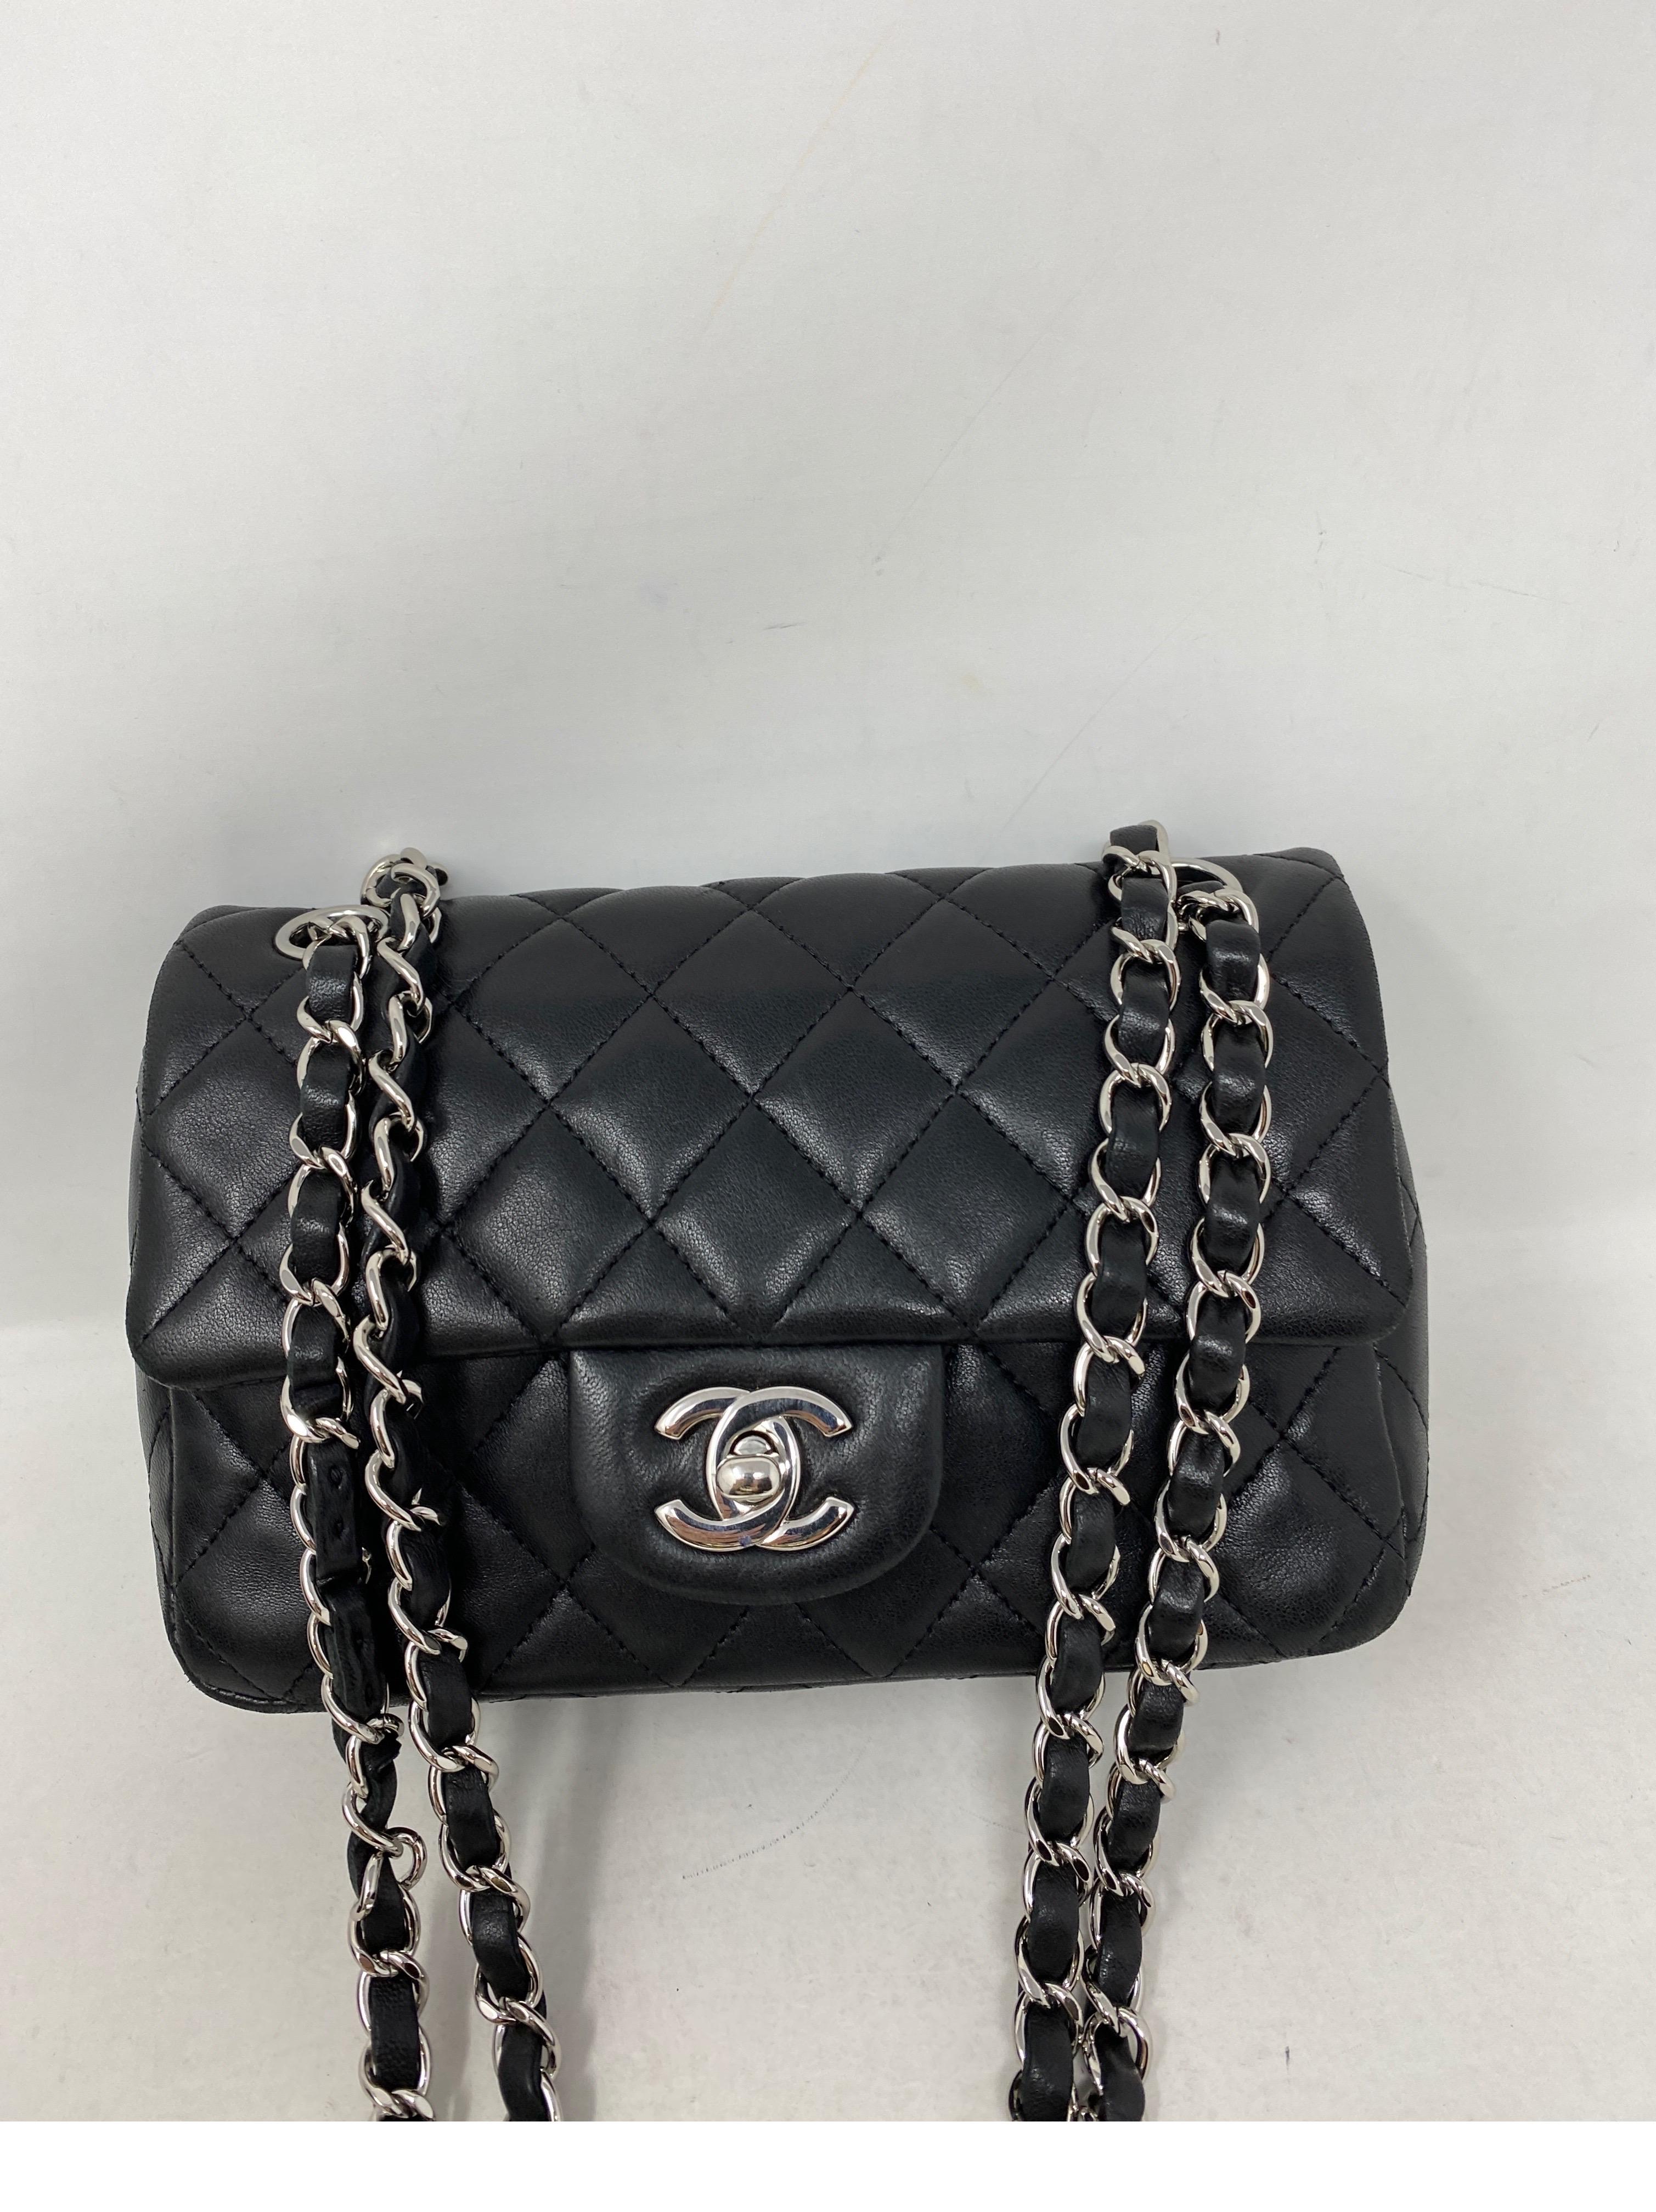 Chanel Small Black Crossbody Bag. Silver hardware. Good condition. The most wanted size by Chanel. Very hard to find. Lambskin leather. Don't miss out on this one. Includes authenticity card. Guaranteed authentic. 